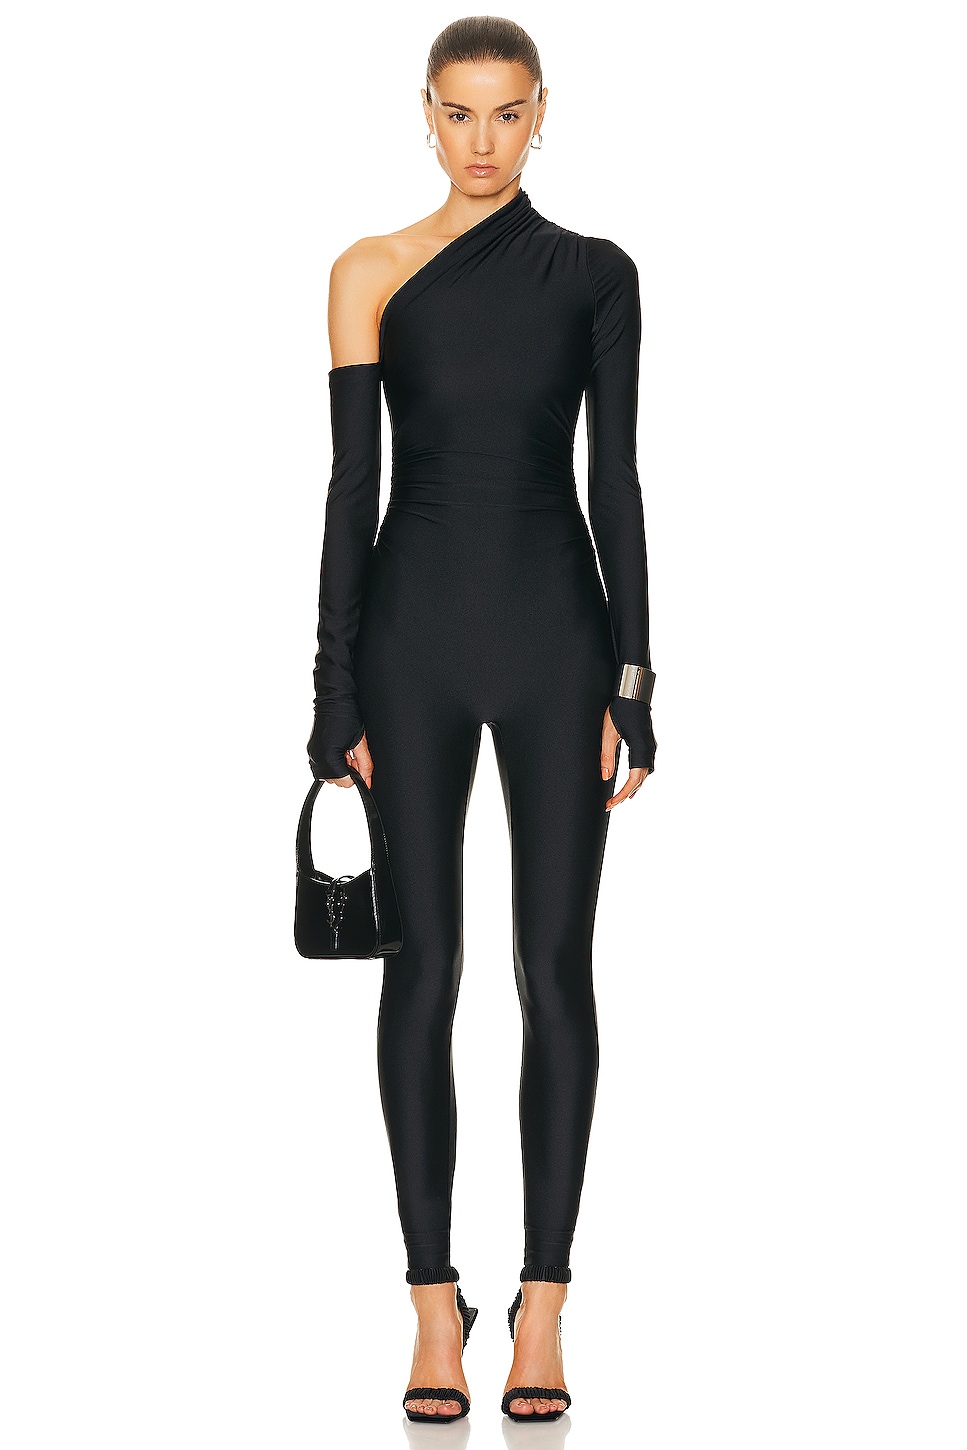 Image 1 of The Andamane Olimpia One Shoulder Jumpsuit in Black